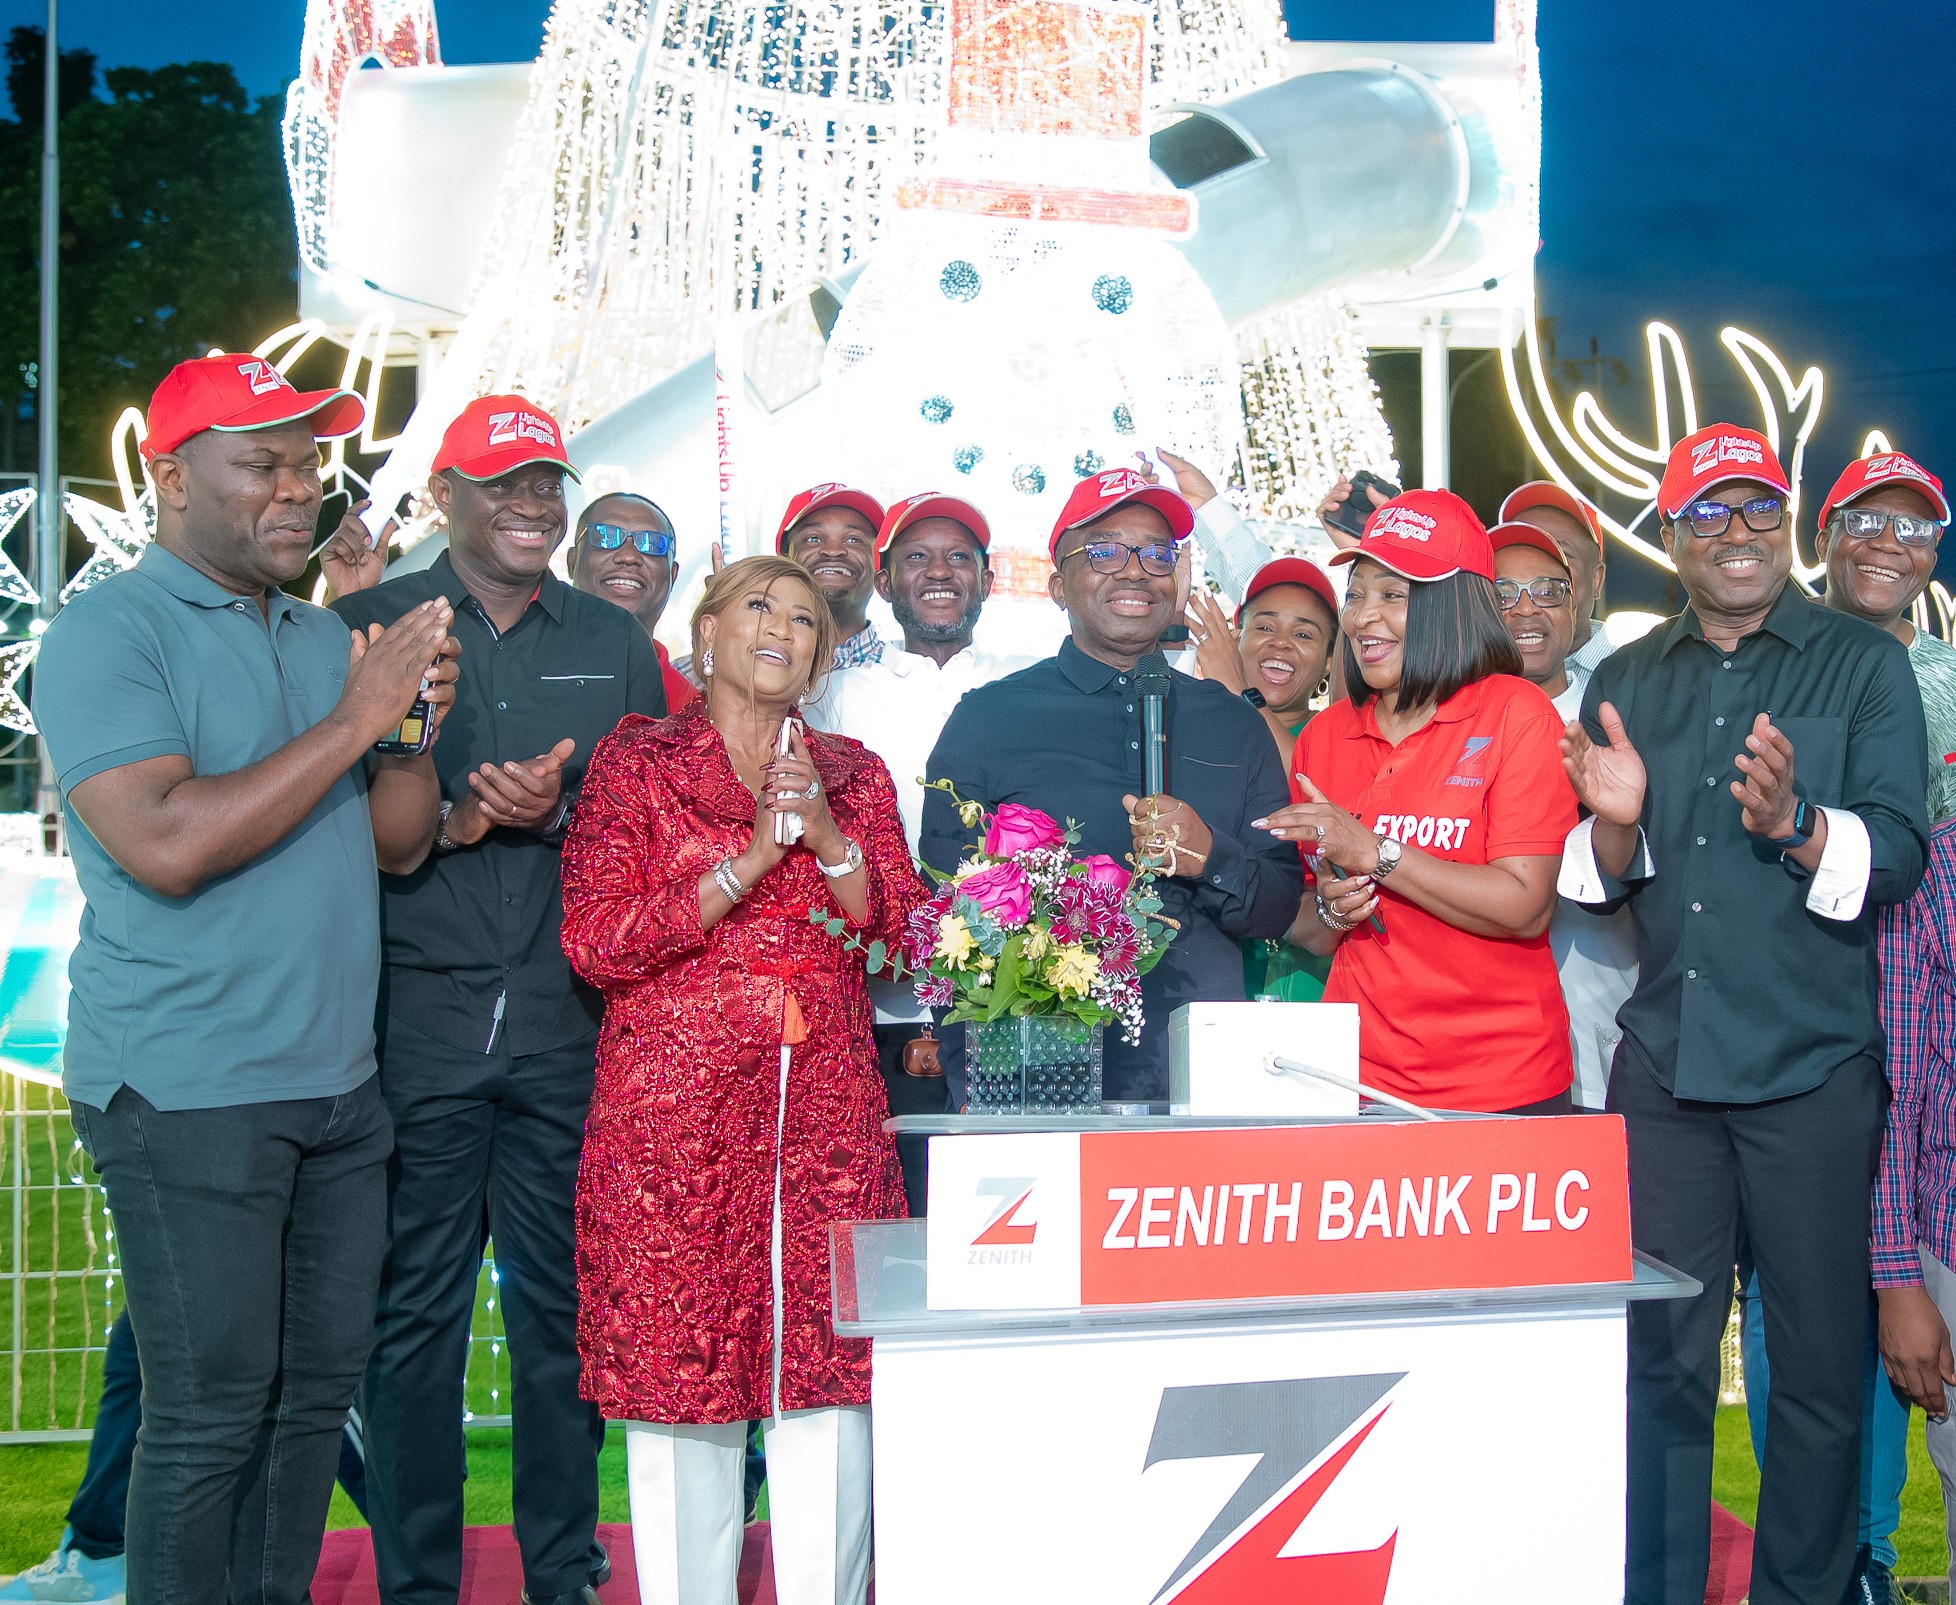 ZENITH BANK HERALDS THE CHRISTMAS AND YULETIDE SEASONS WITH AJOSE ADEOGUN STREET LIGHT-UP